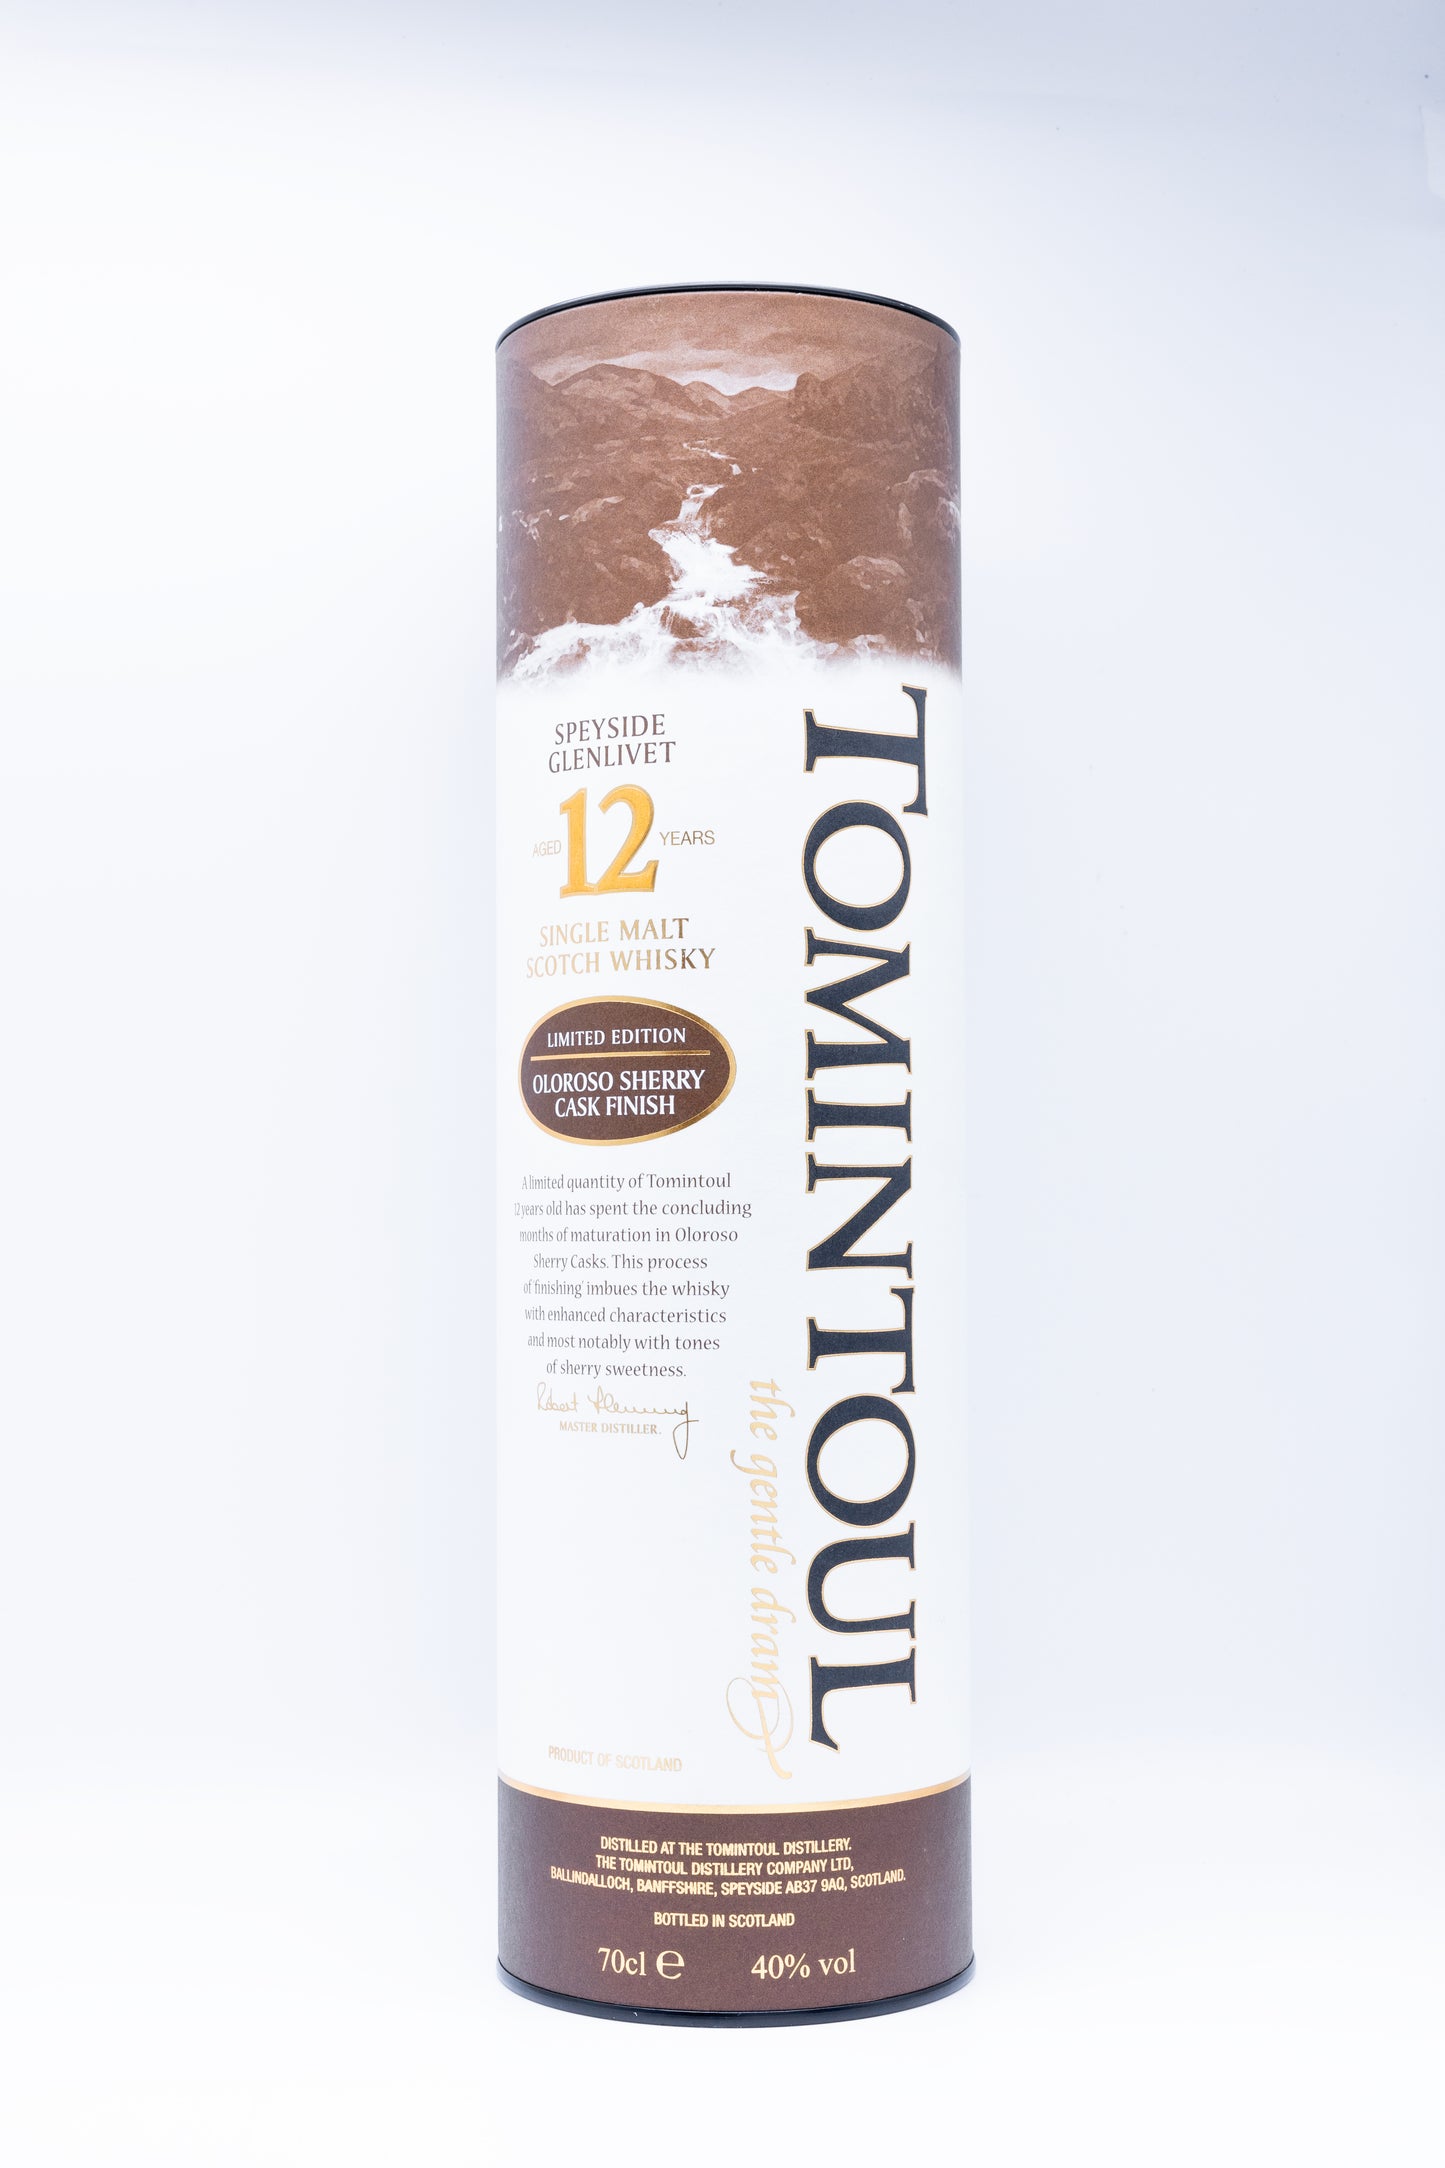 Tomintoul 12 Year old Oloroso Sherry Cask